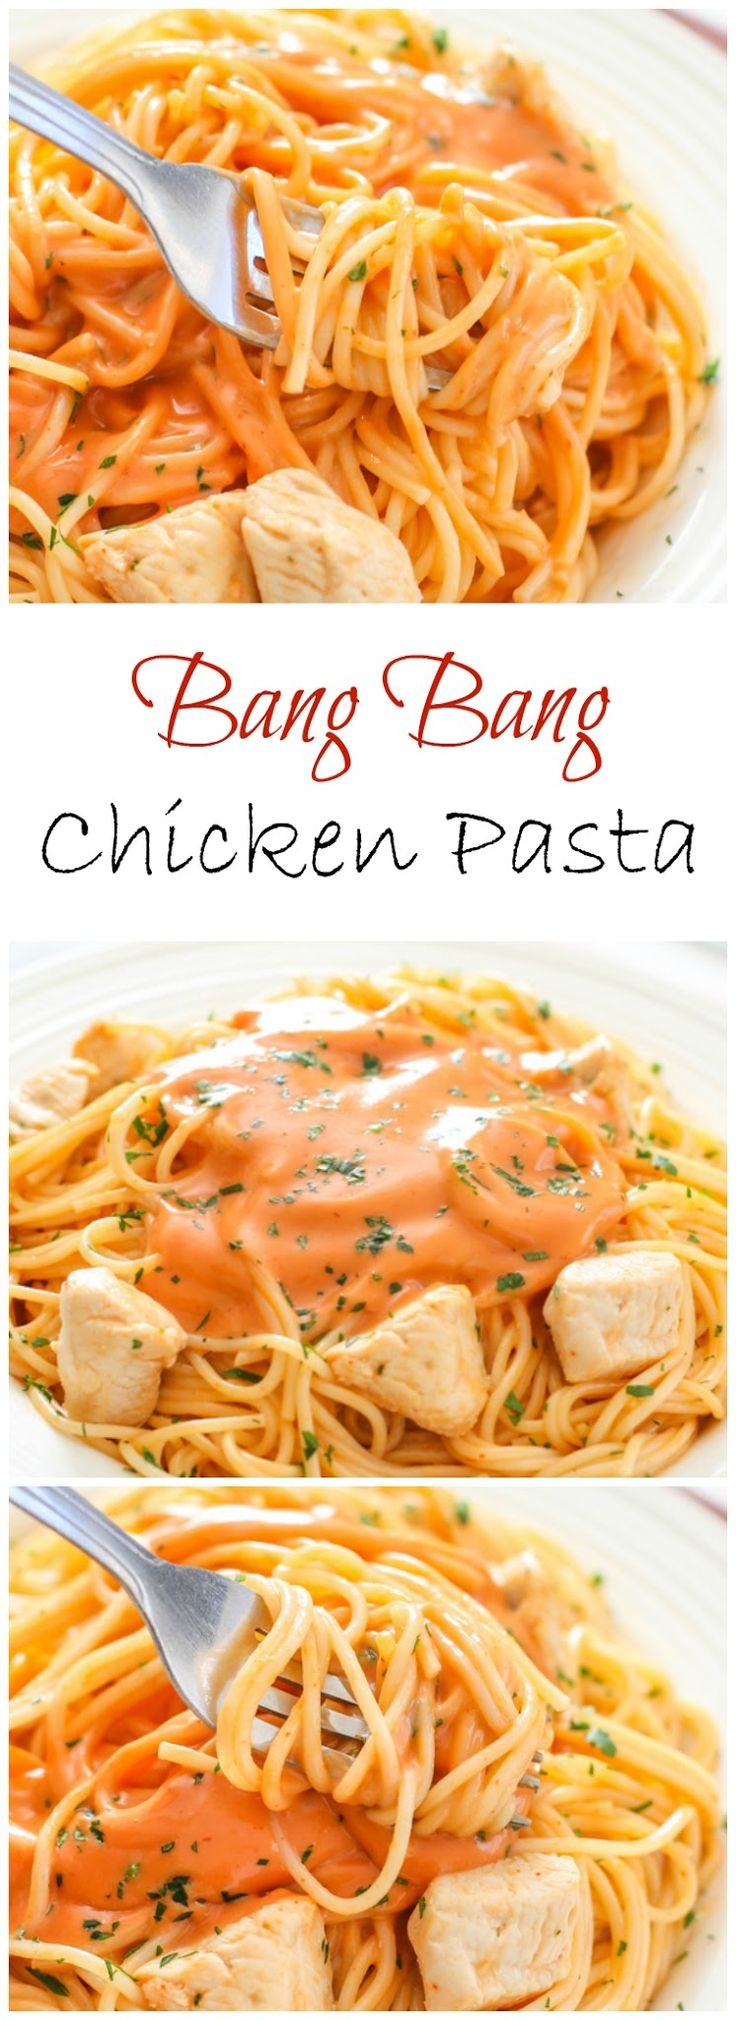 This chicken pasta is tossed in an addicting orang...